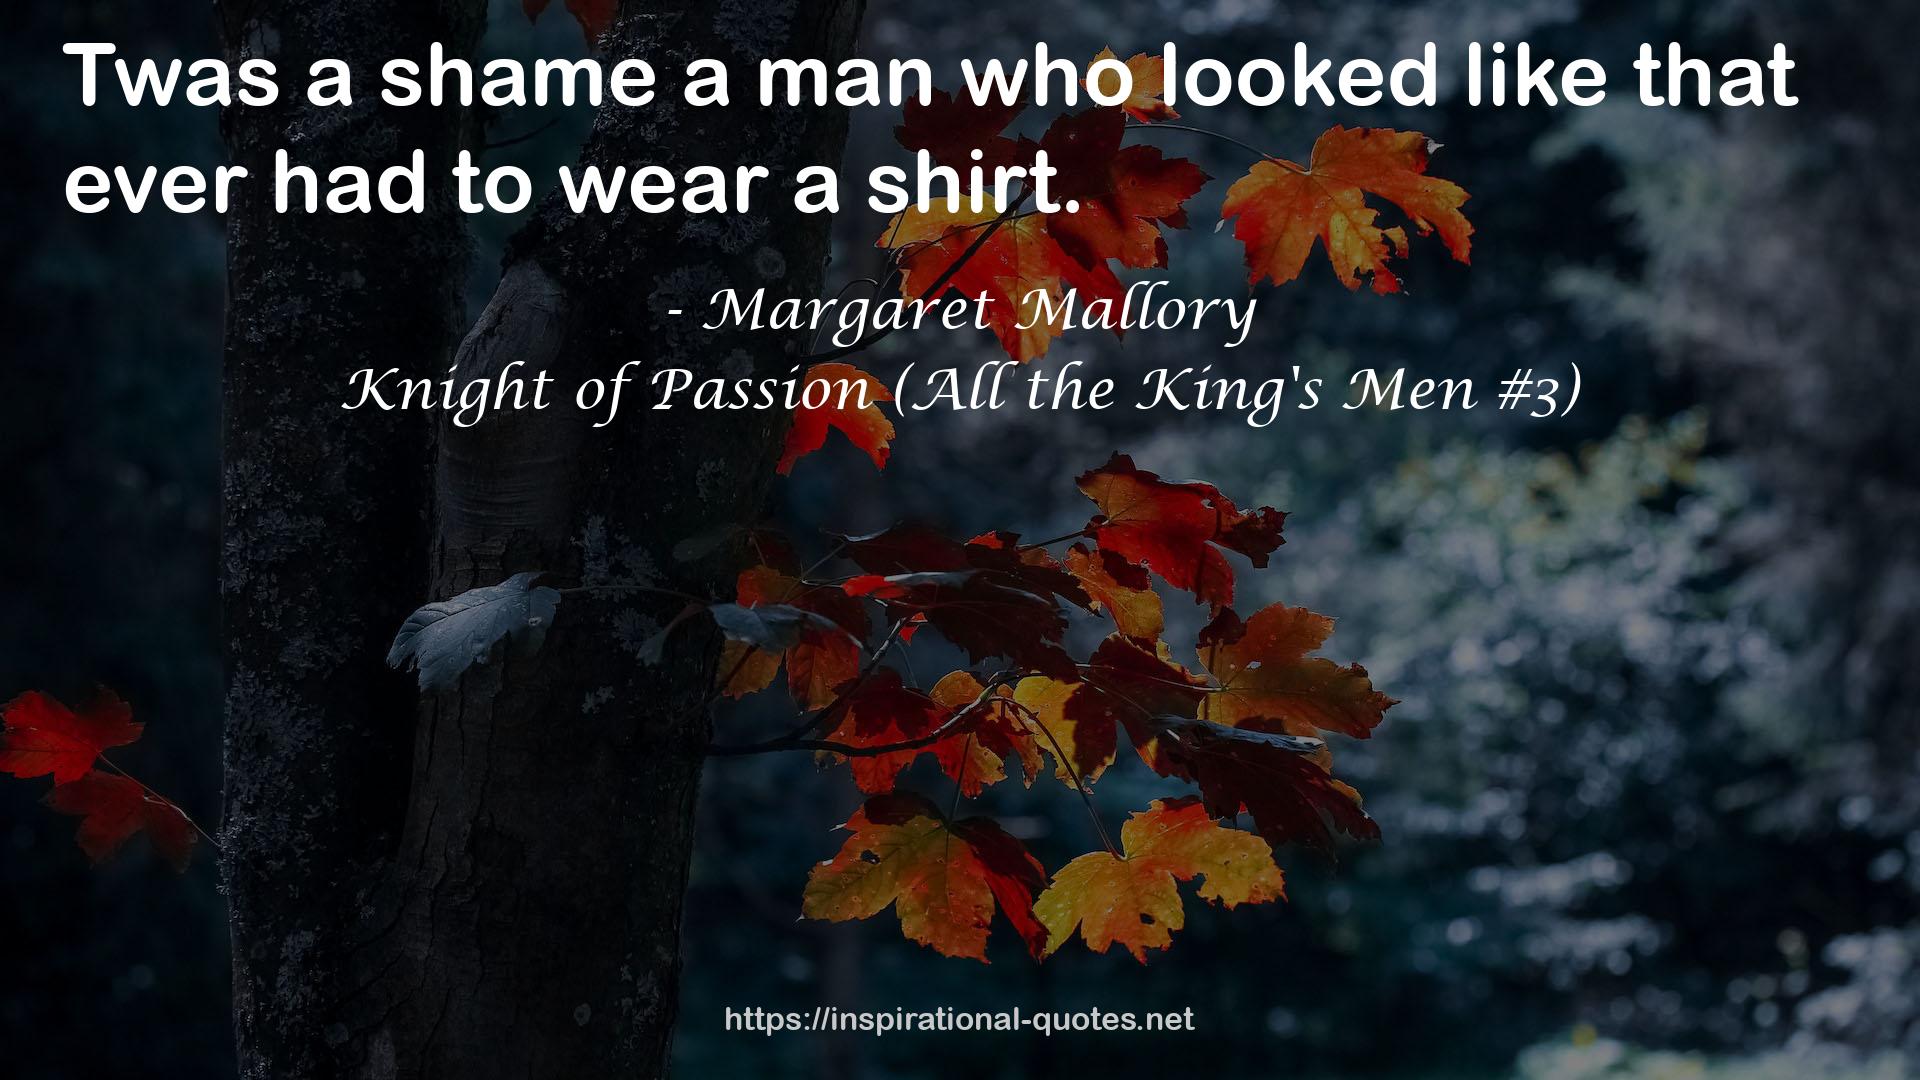 Knight of Passion (All the King's Men #3) QUOTES